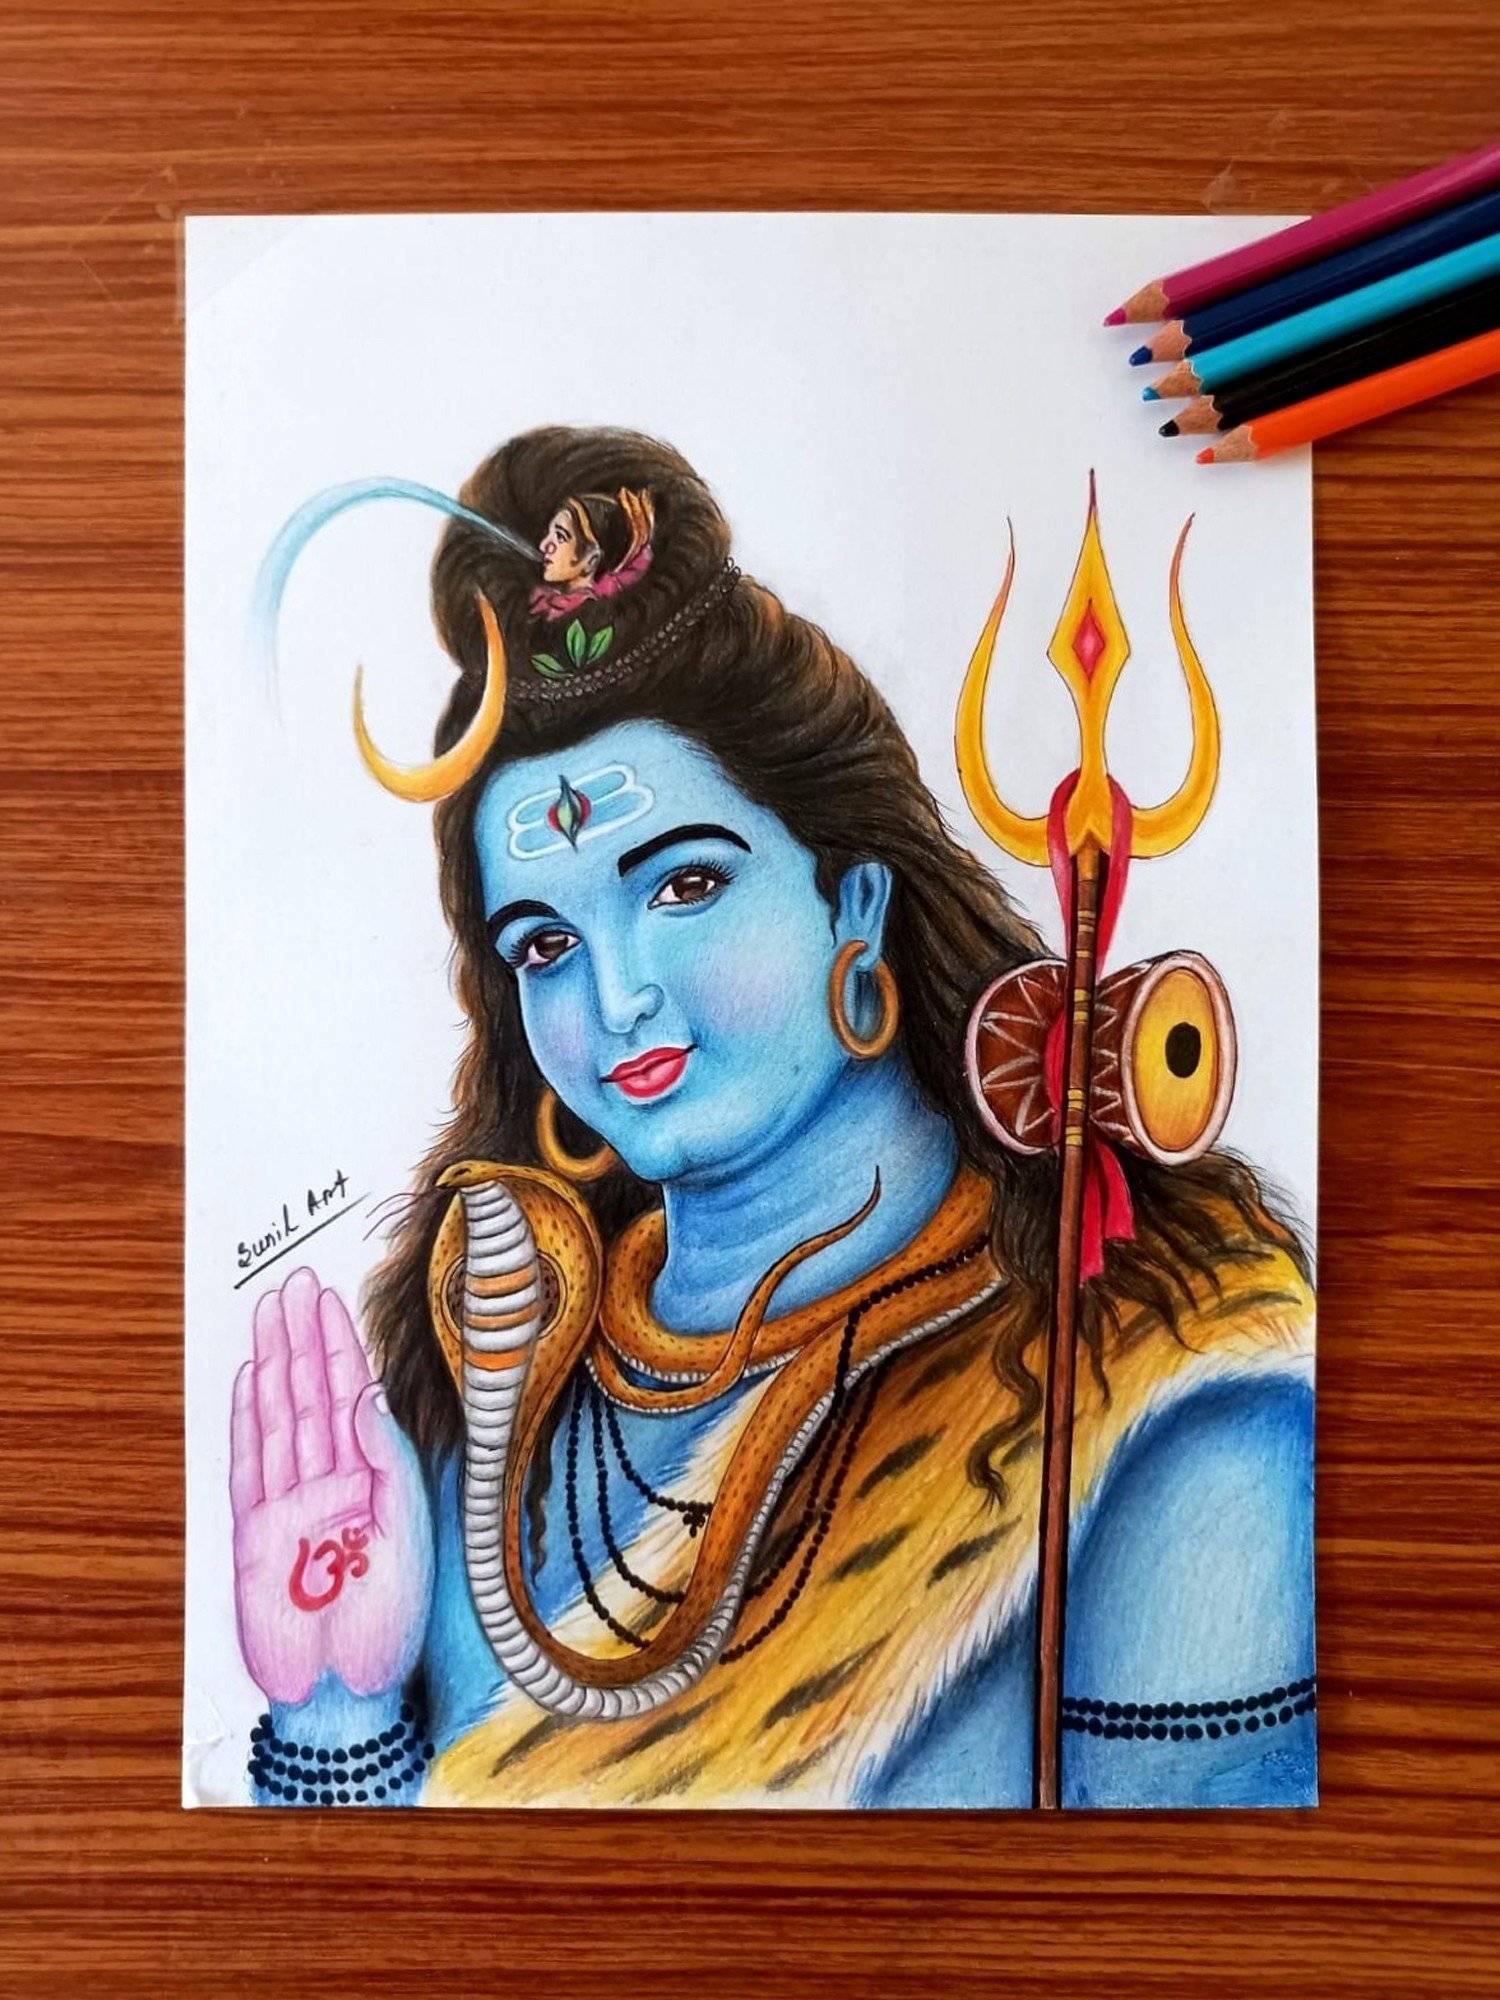 Share more than 176 pencil sketch of shiva